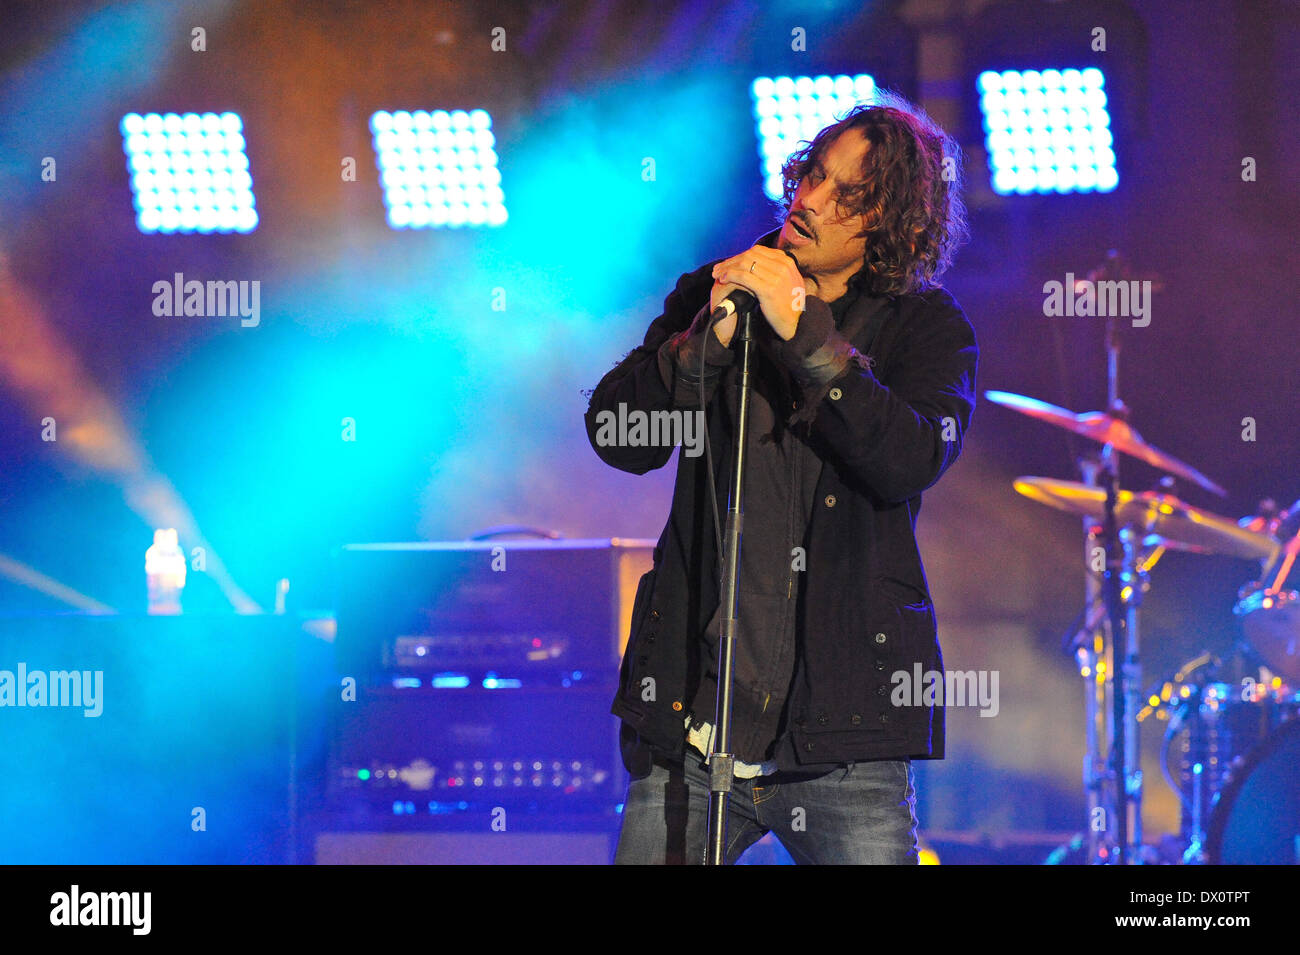 Austin, Texas, USA. 14th Mar, 2014. Chris Cornell of Soundgarden performs in concert at the Guitar Center Direct TV live stream show from a roof top party during South By Southwest (SXSW) on March 14, 2014 in Austin, Texas - USA (Photo by Manuel Nauta/NurPhoto) © Manuel Nauta/NurPhoto/ZUMAPRESS.com/Alamy Live News Stock Photo